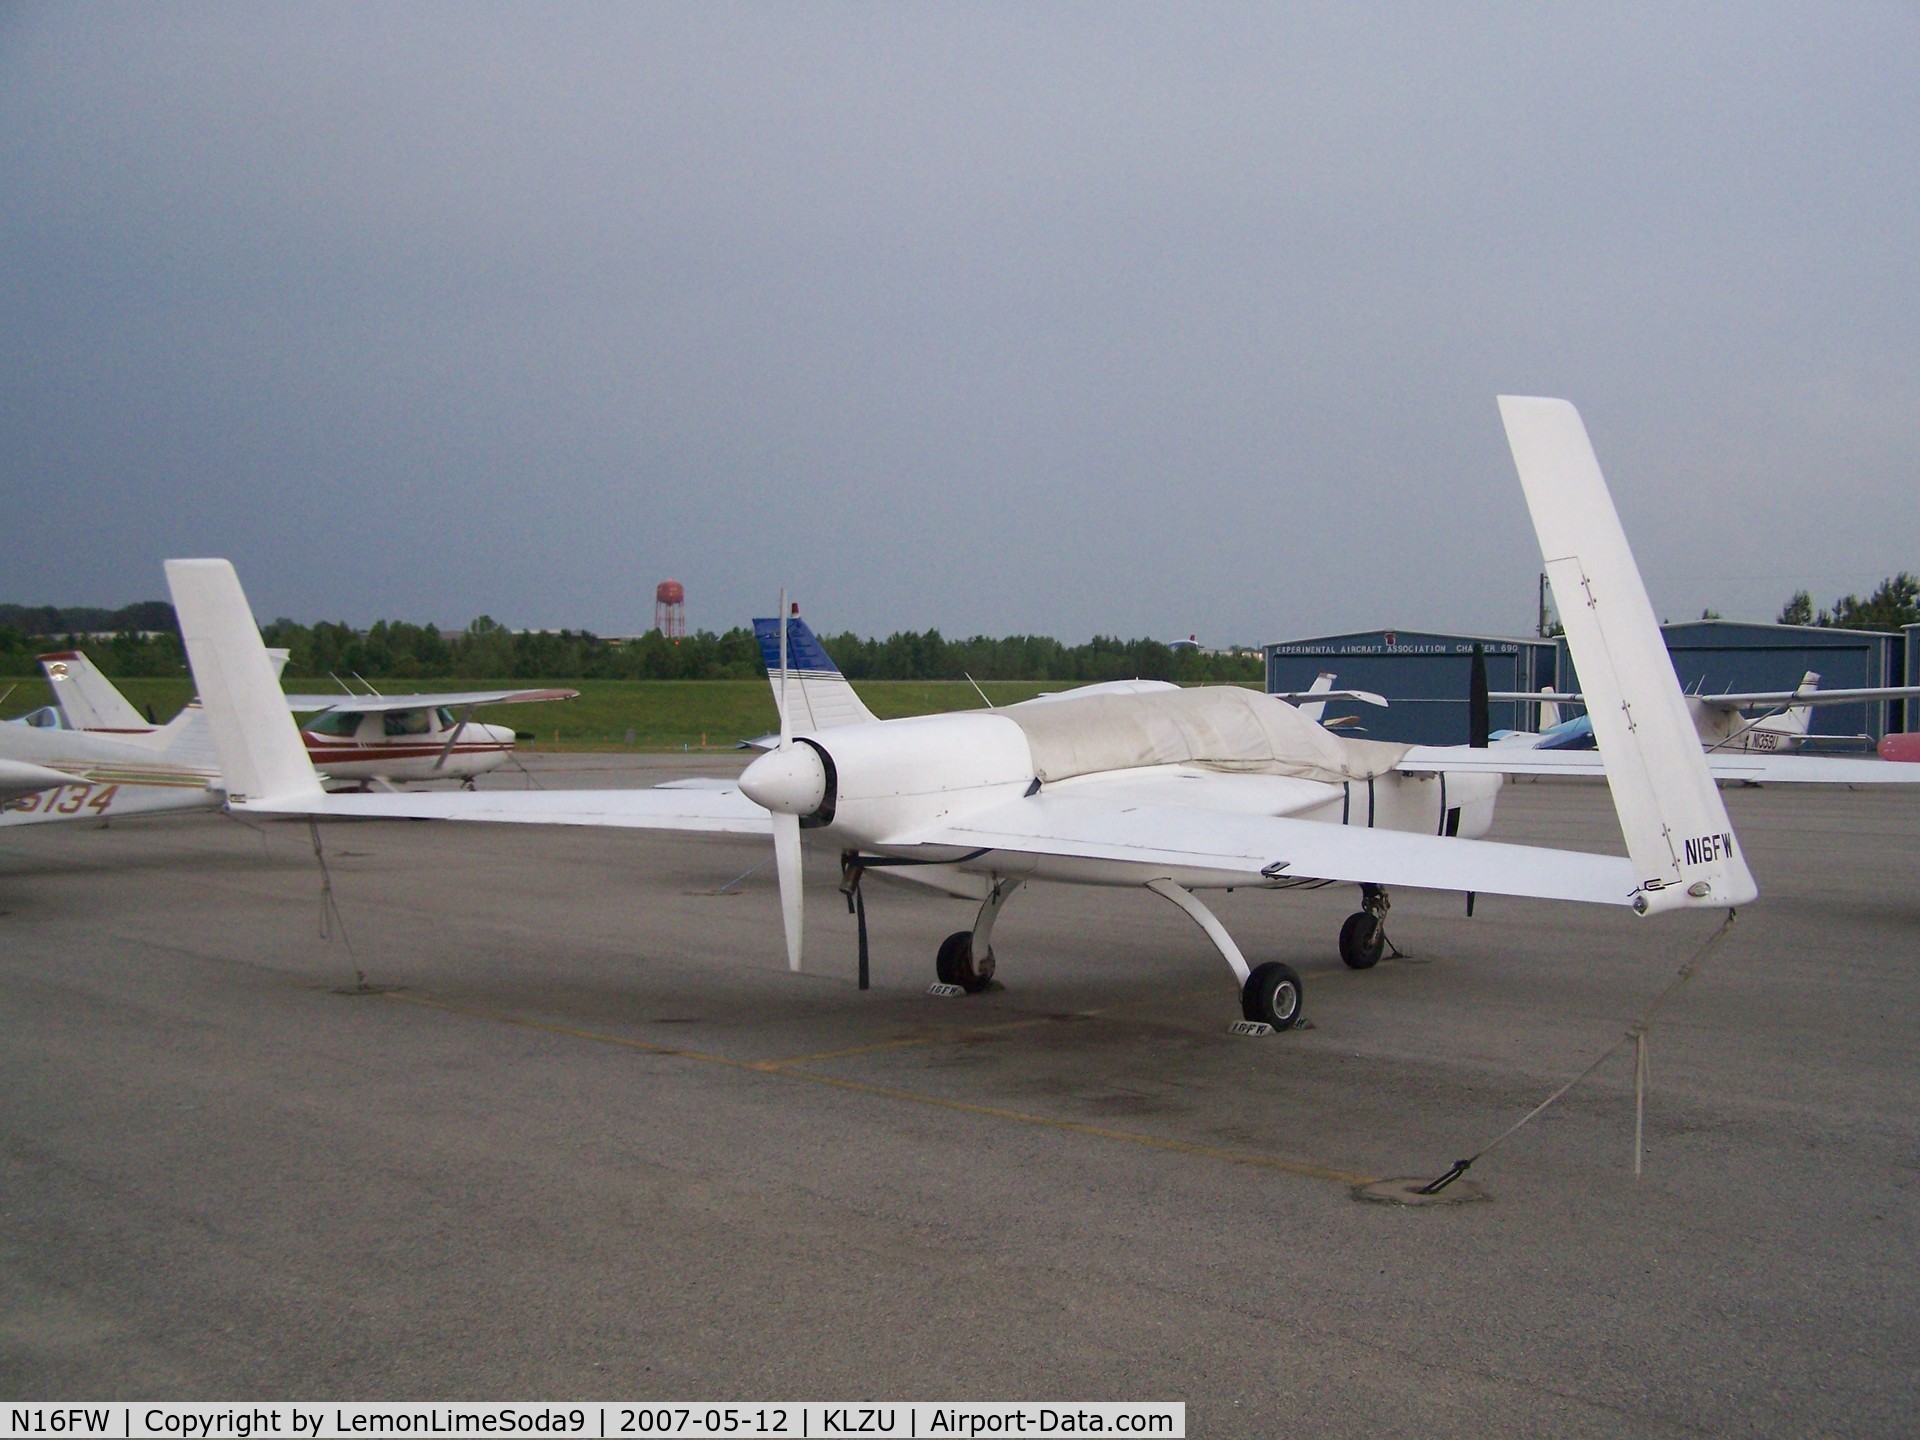 N16FW, Rutan Defiant C/N 28, Just another day.